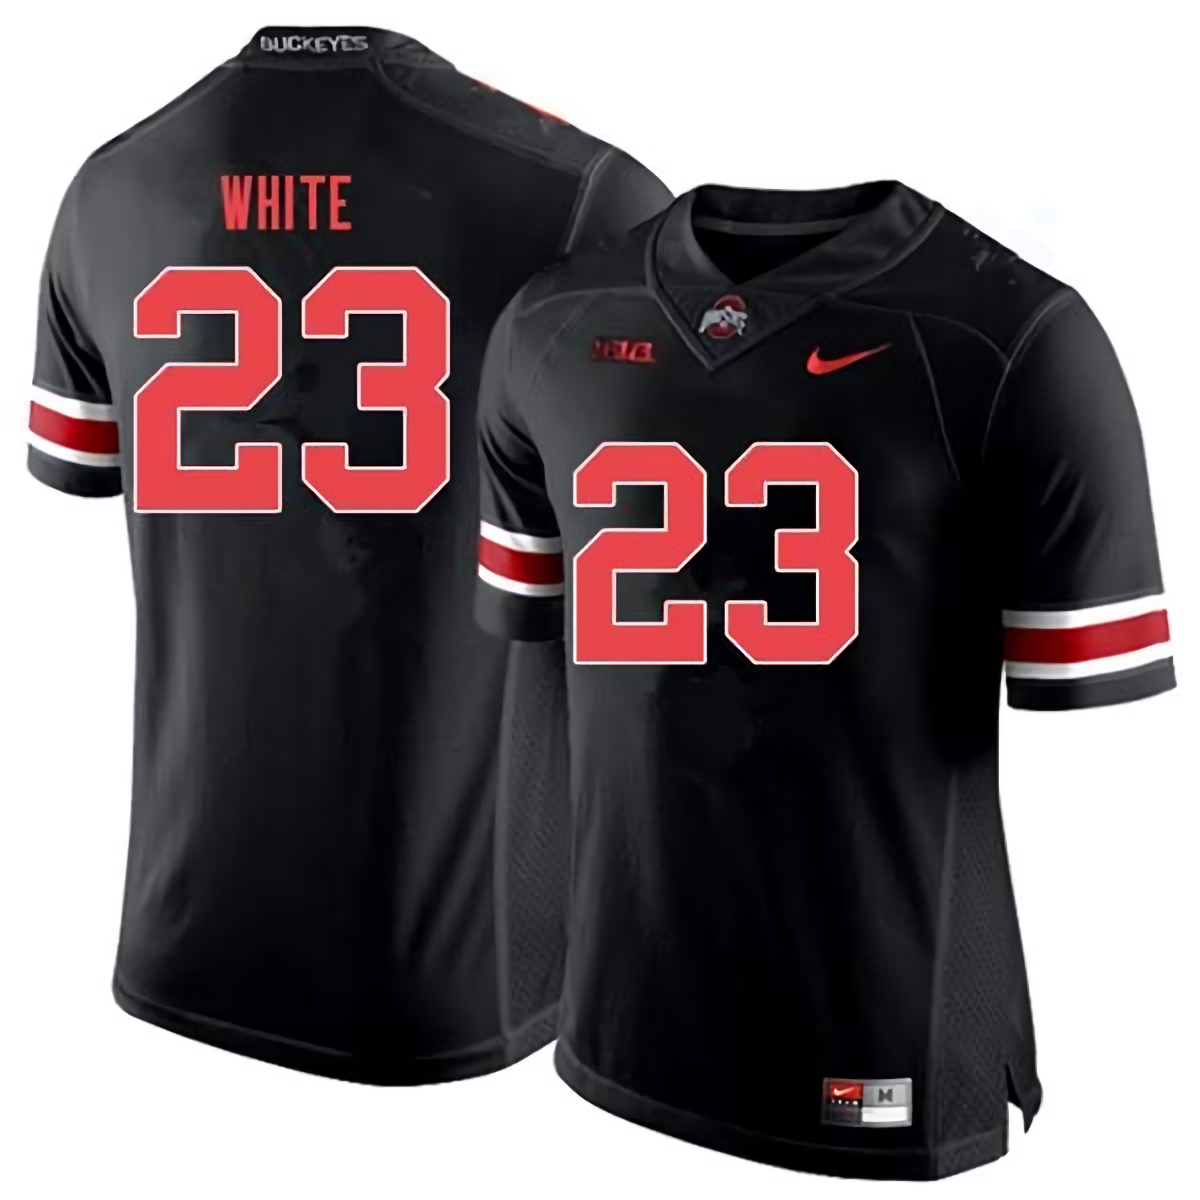 De'Shawn White Ohio State Buckeyes Men's NCAA #23 Nike Black Out College Stitched Football Jersey FZR2656YB